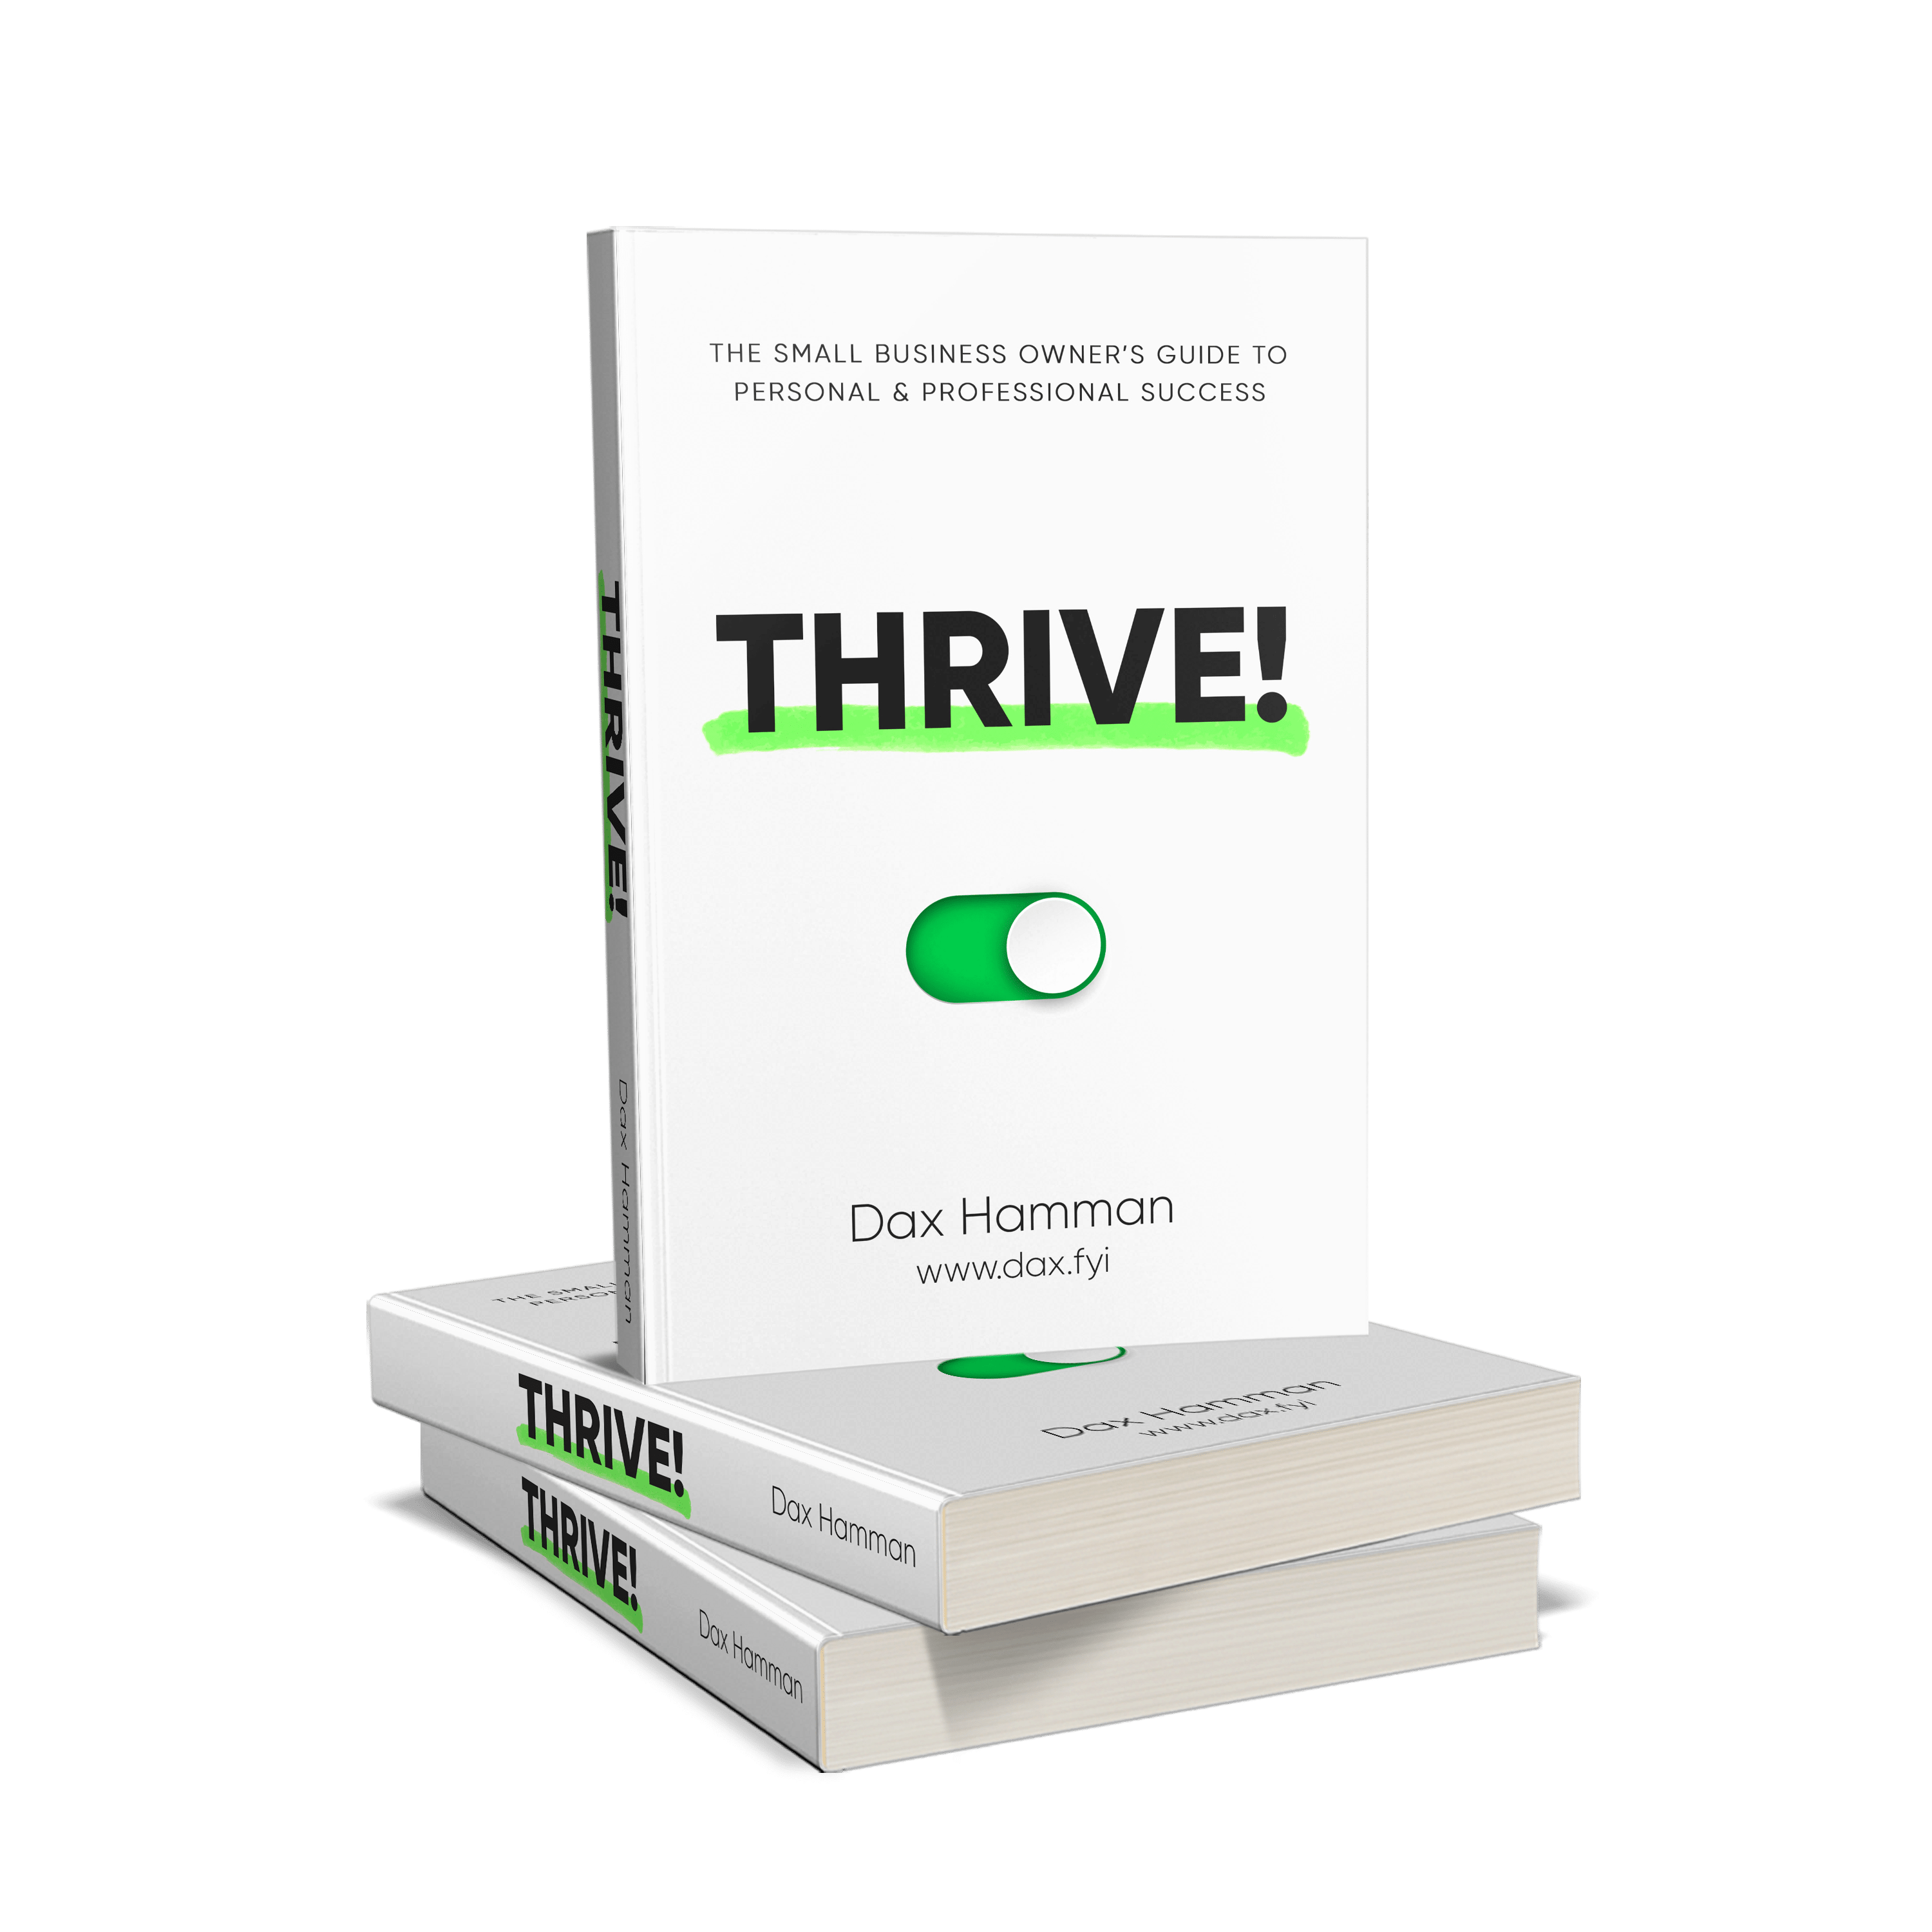 dax hamman THRIVE! Small Business Guide book cover